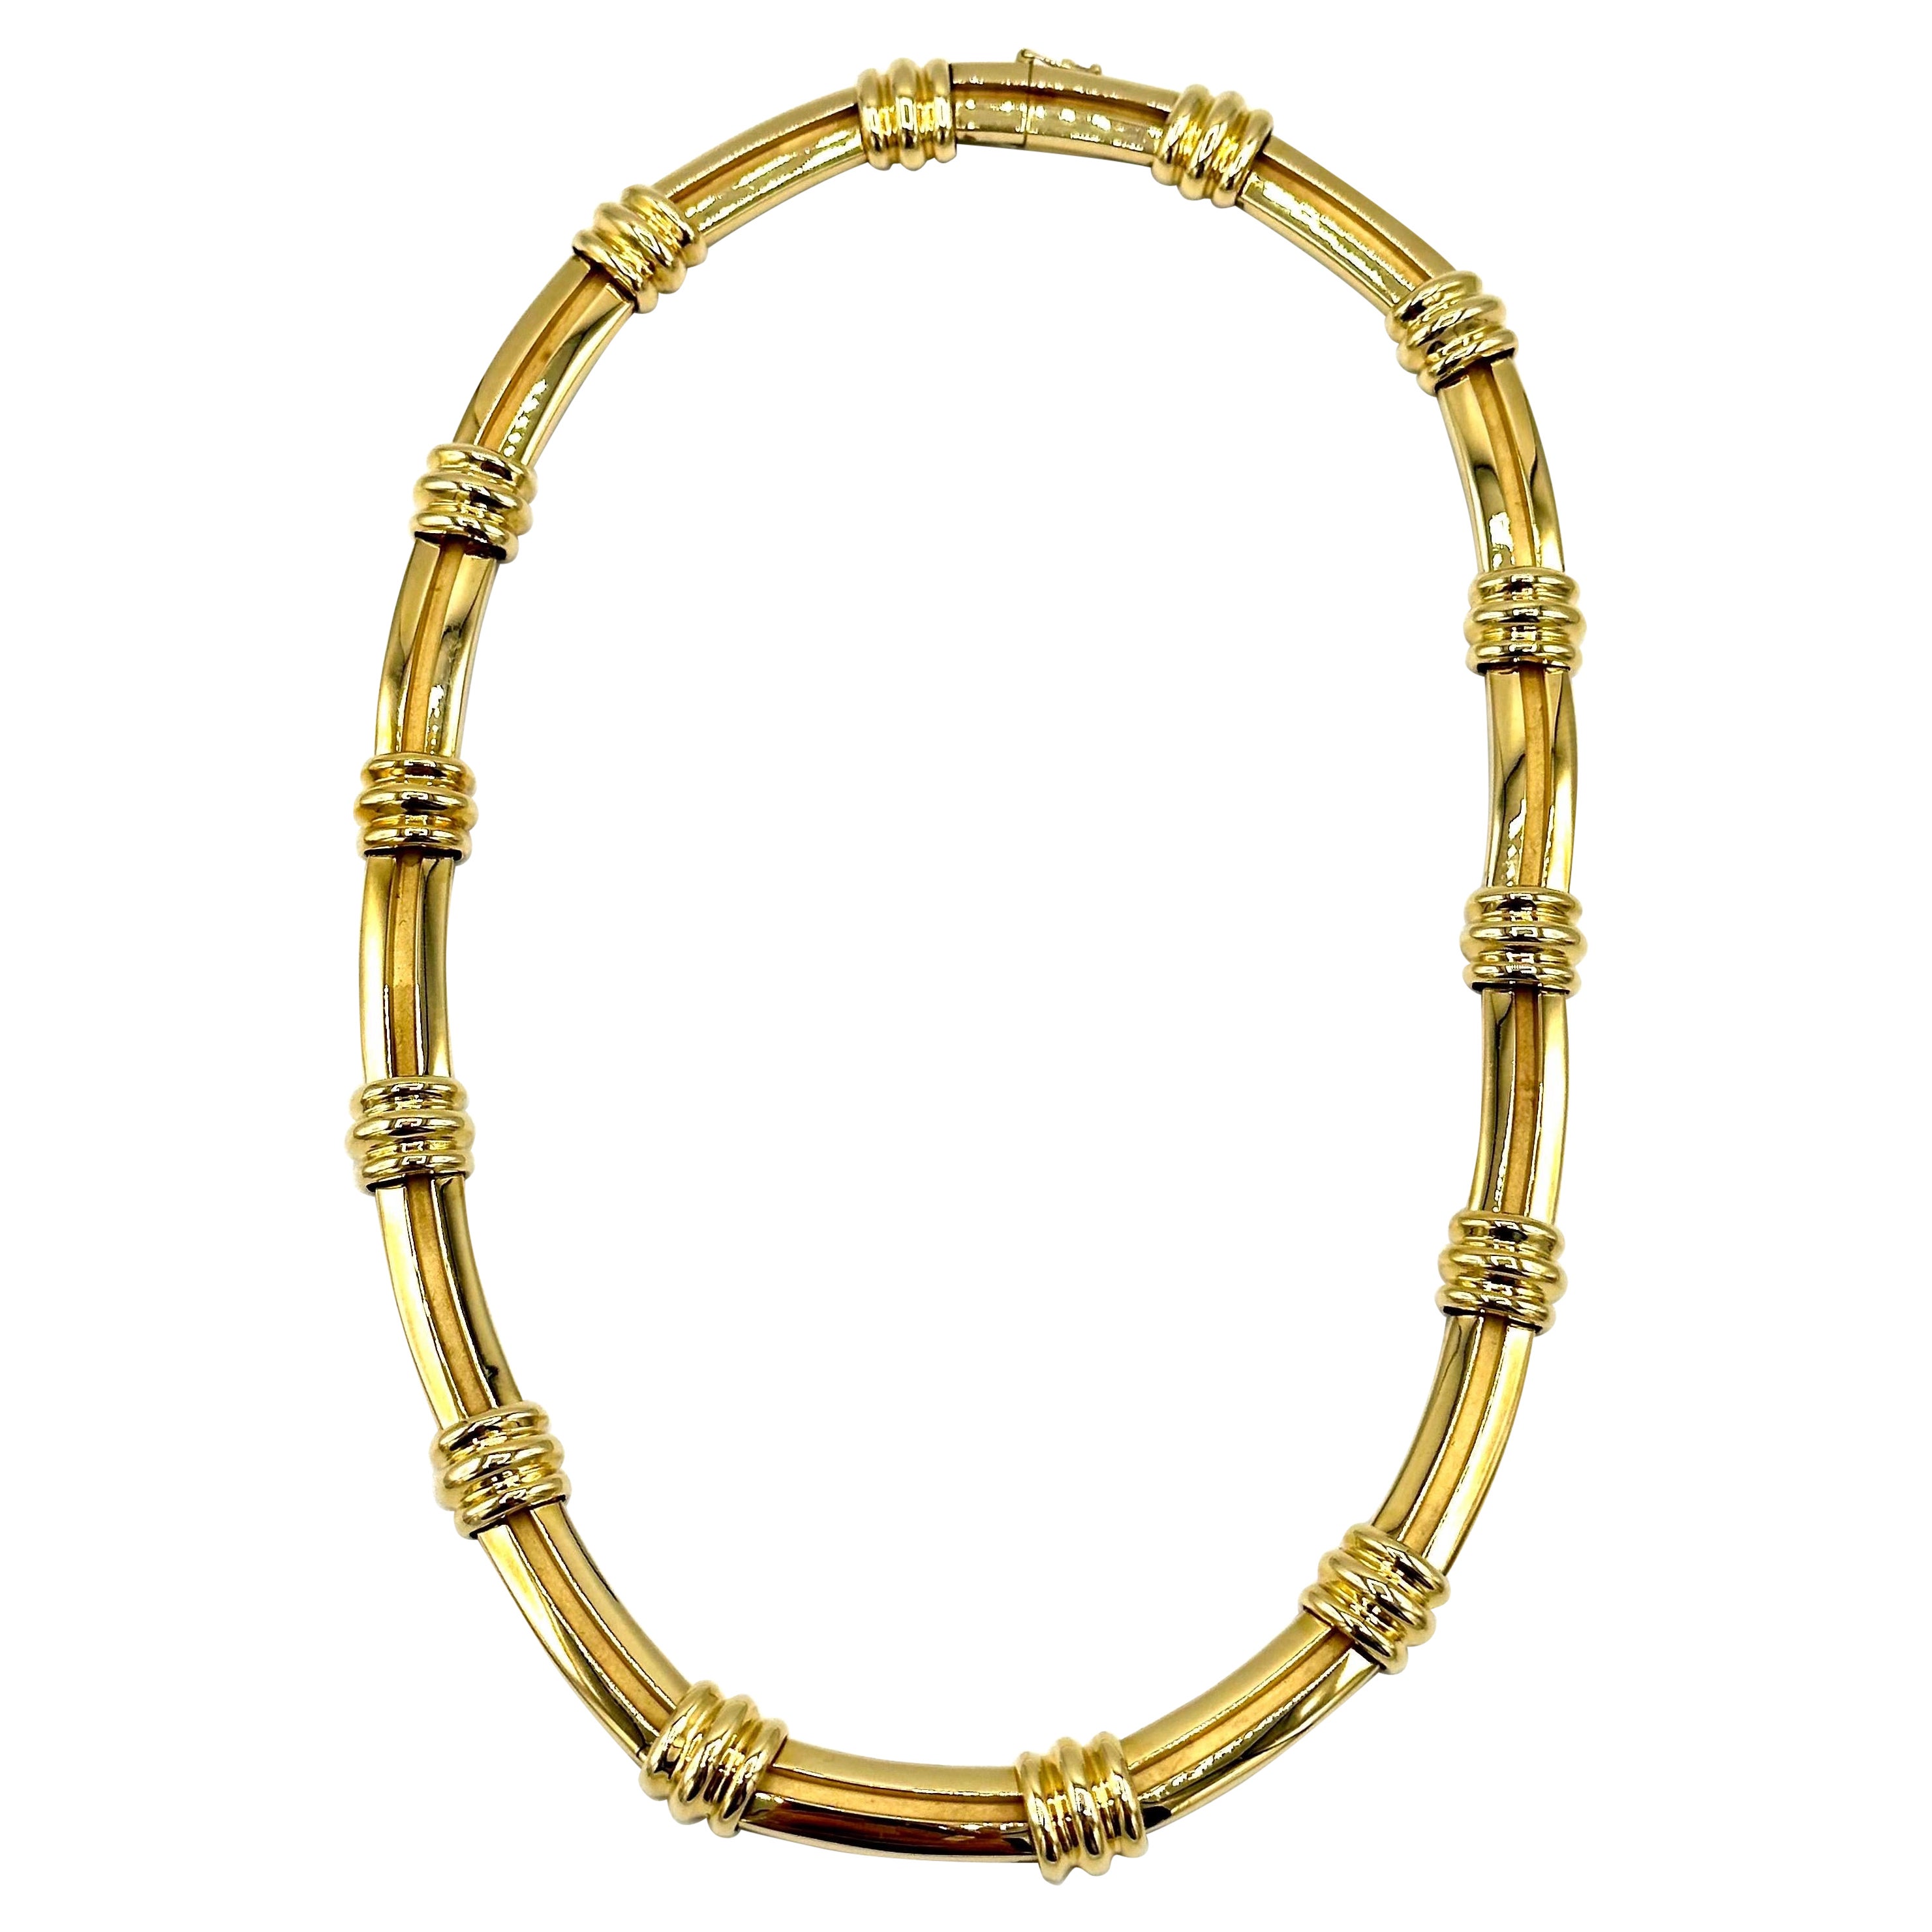 Tiffany & Co. 18k Yellow Gold Bar Link Necklace